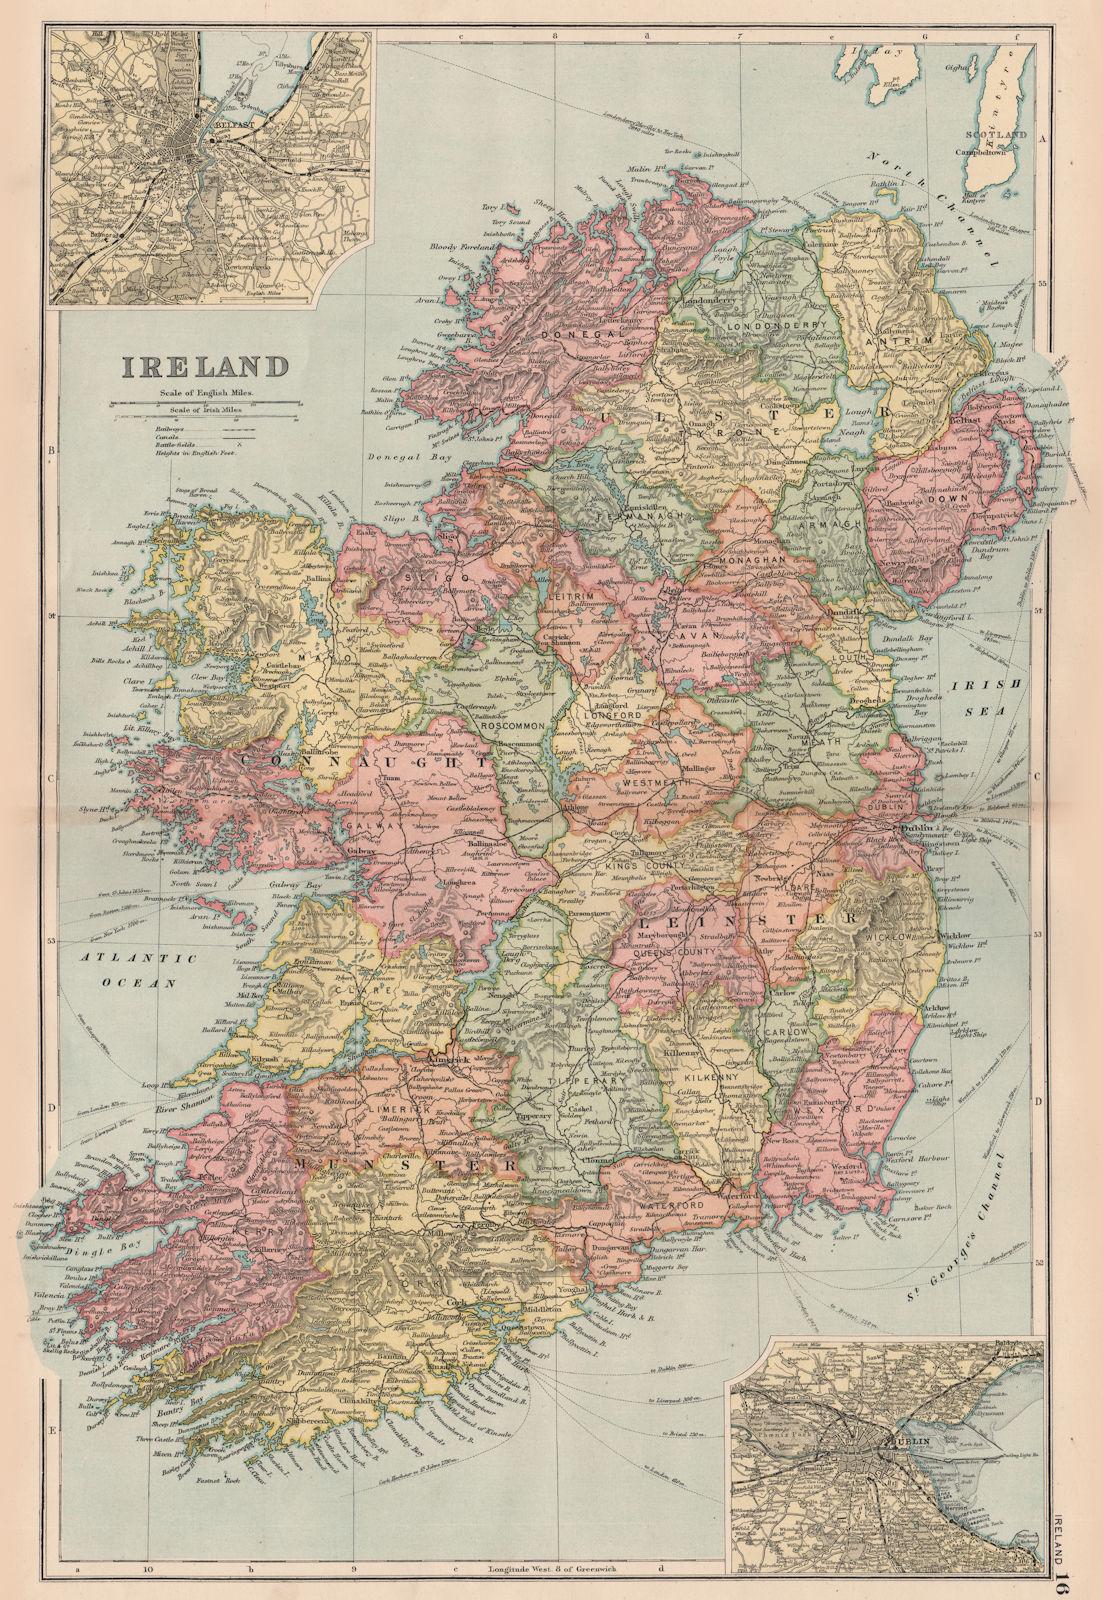 Associate Product IRELAND. Showing counties. Inset Belfast & Dublin. BACON 1893 old antique map